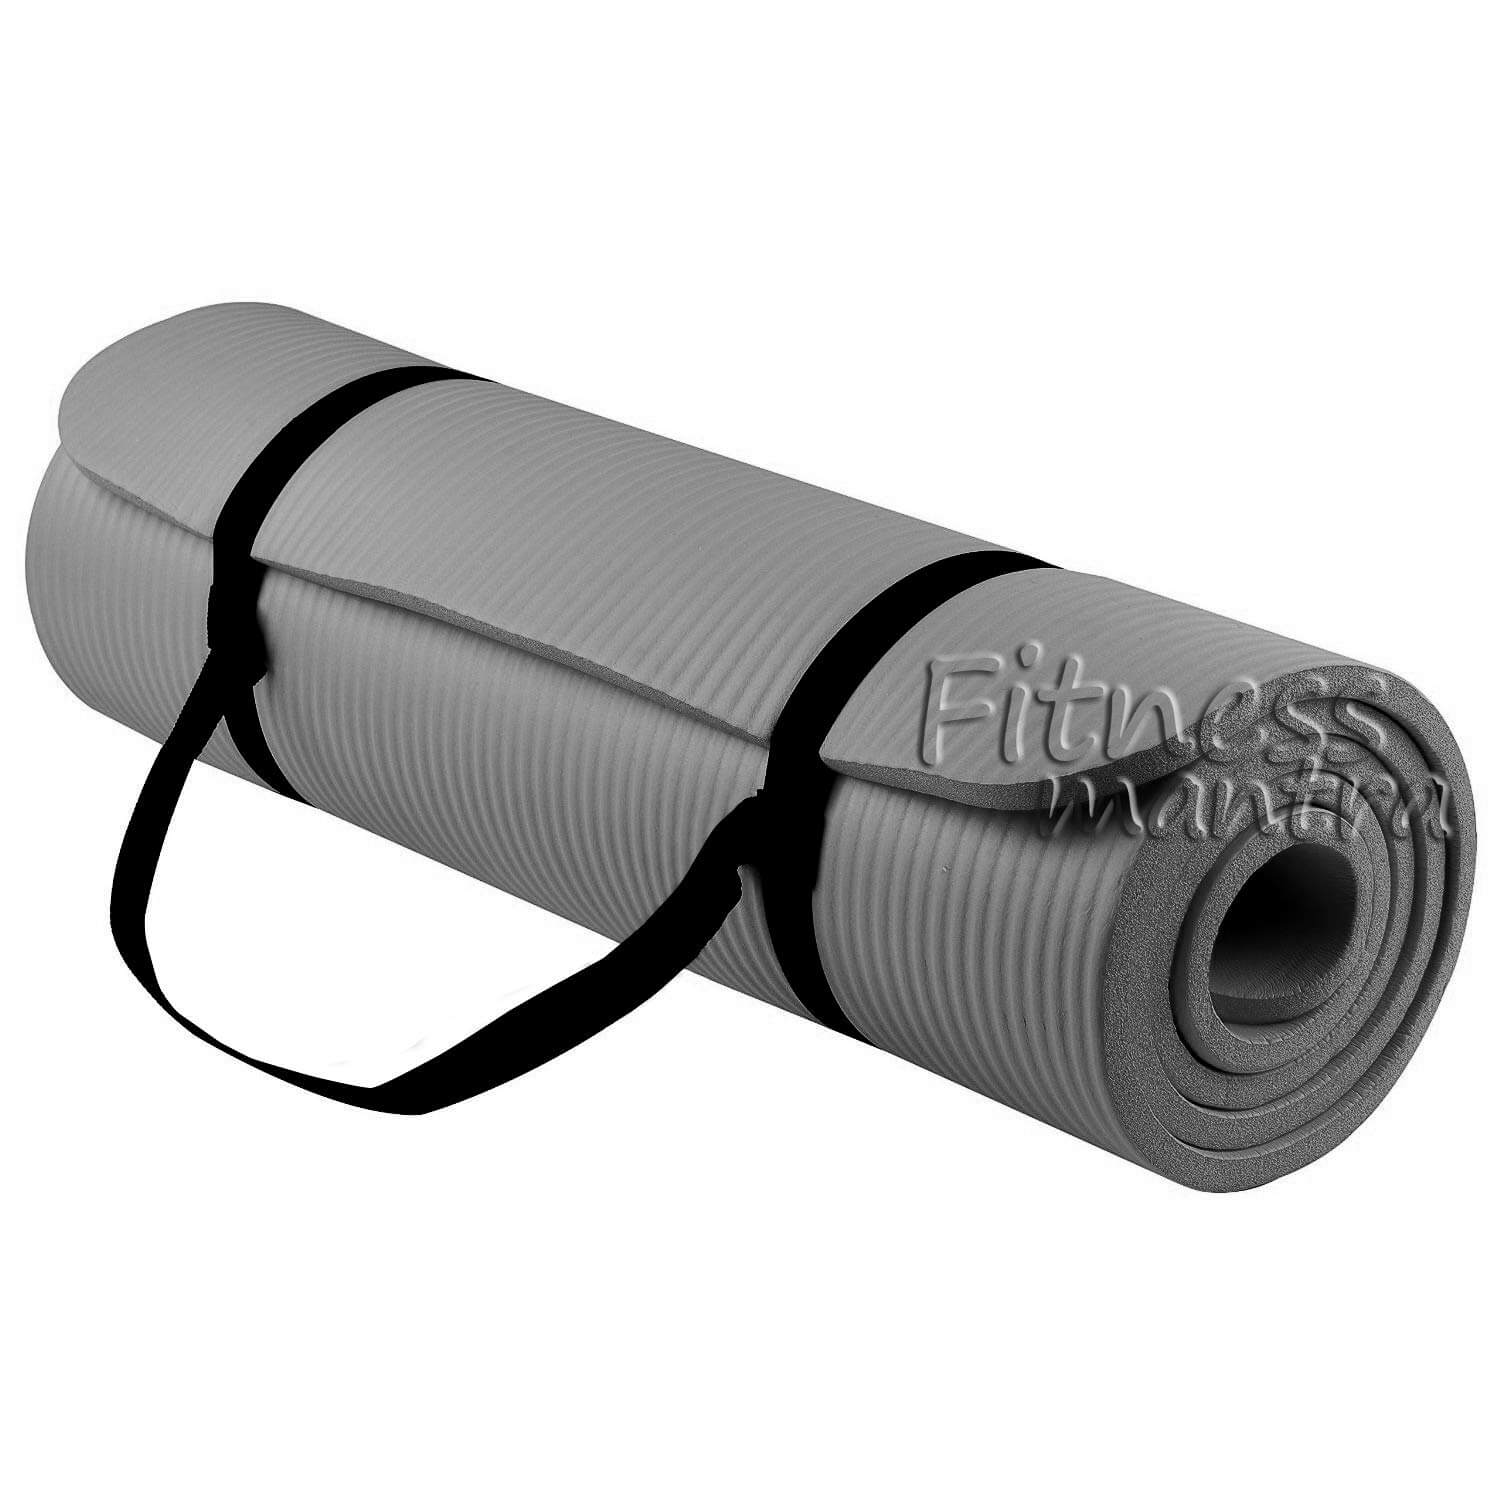 Fitness Mantra Yoga Mat with Strap